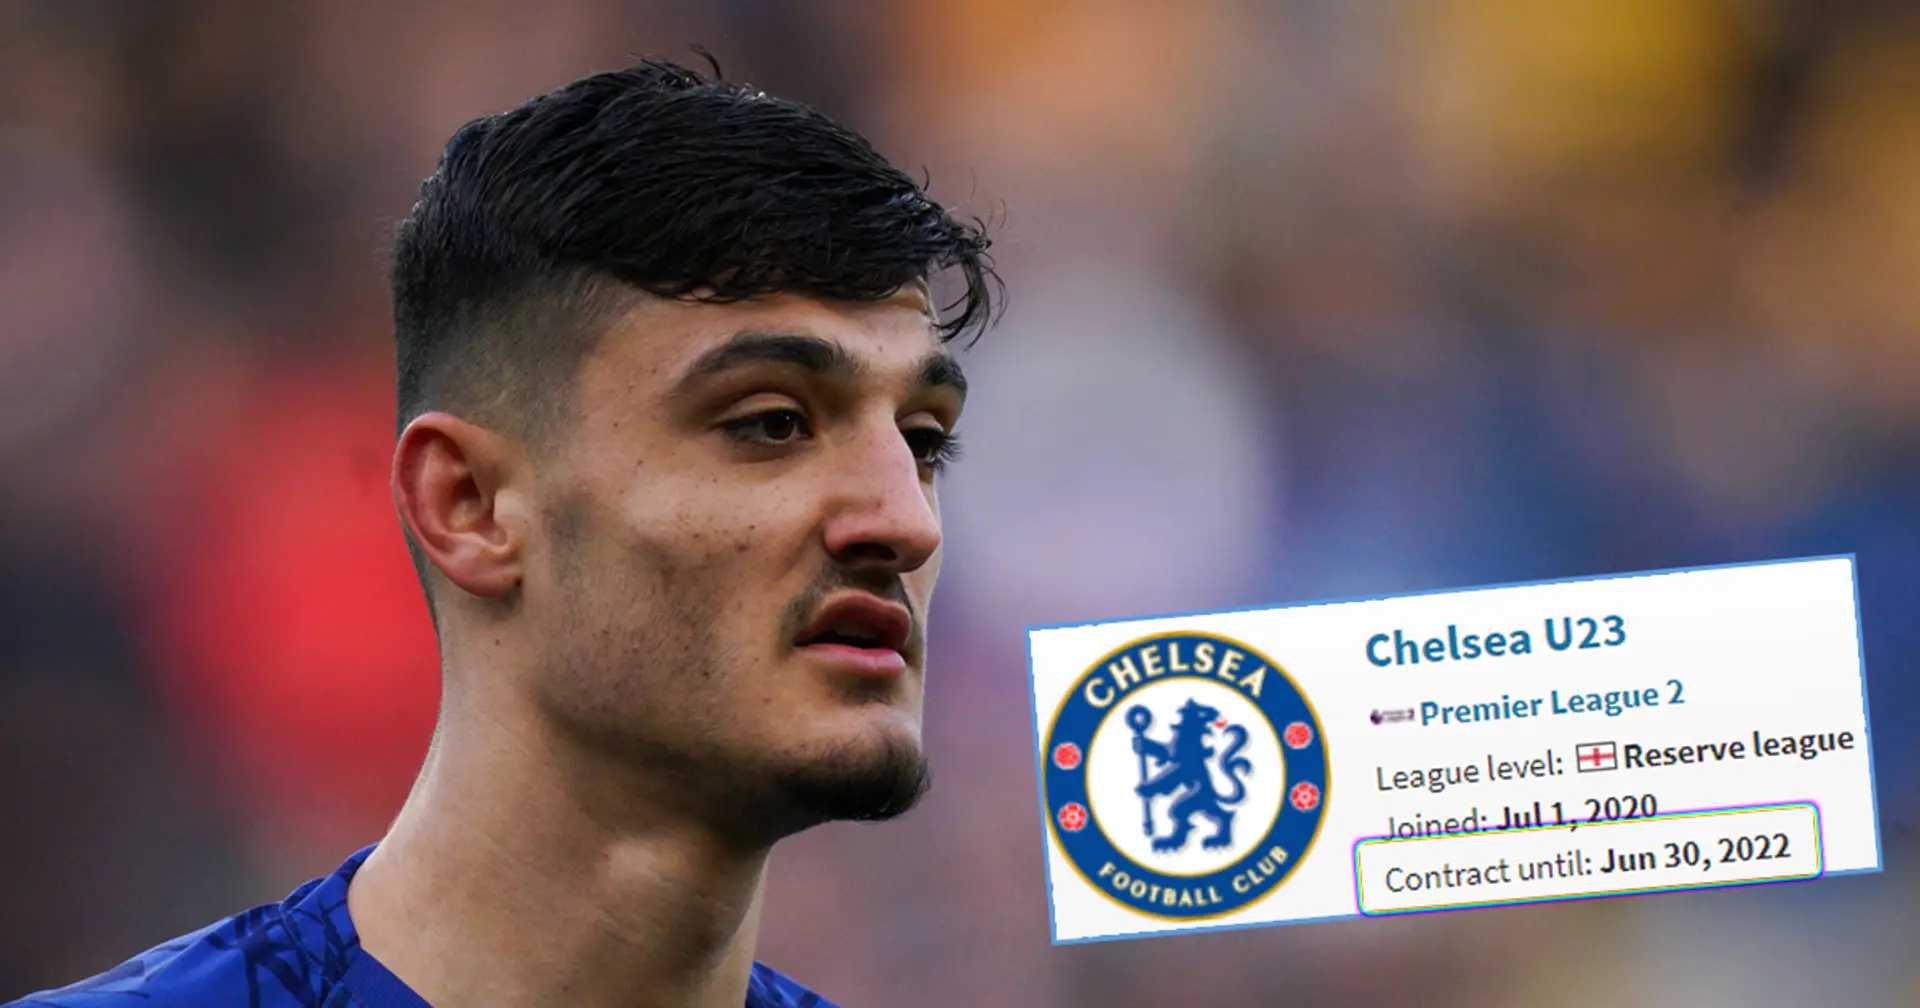 Highly-rated youngster Broja to sign new Chelsea deal after successful loan spell (reliability: 5 stars)